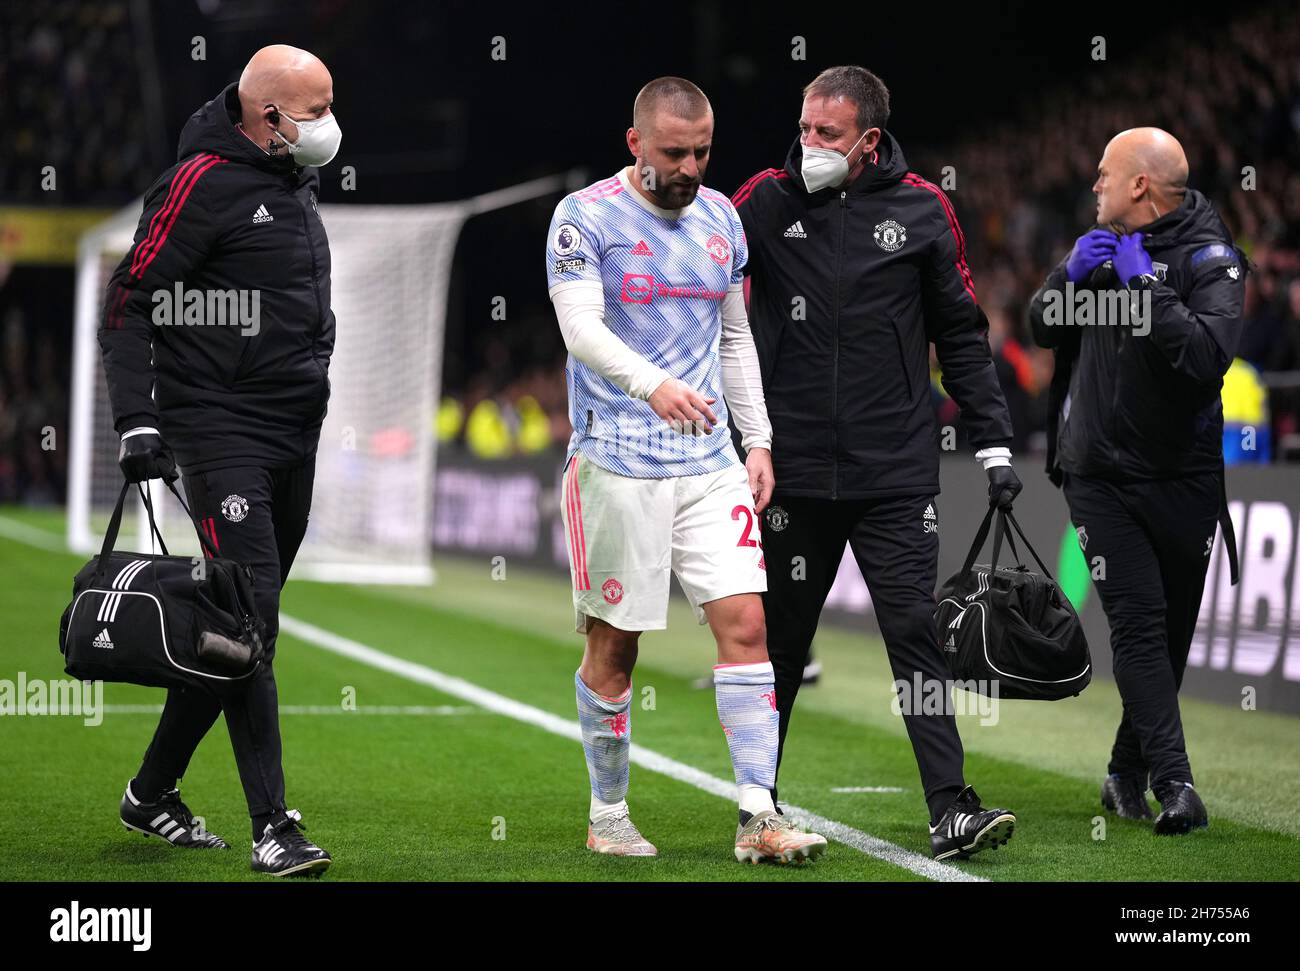 Manchester United's Luke Shaw walks off the pitch after an injury during the Premier League match at Vicarage Road, Watford. Picture date: Saturday November 20, 2021. Stock Photo